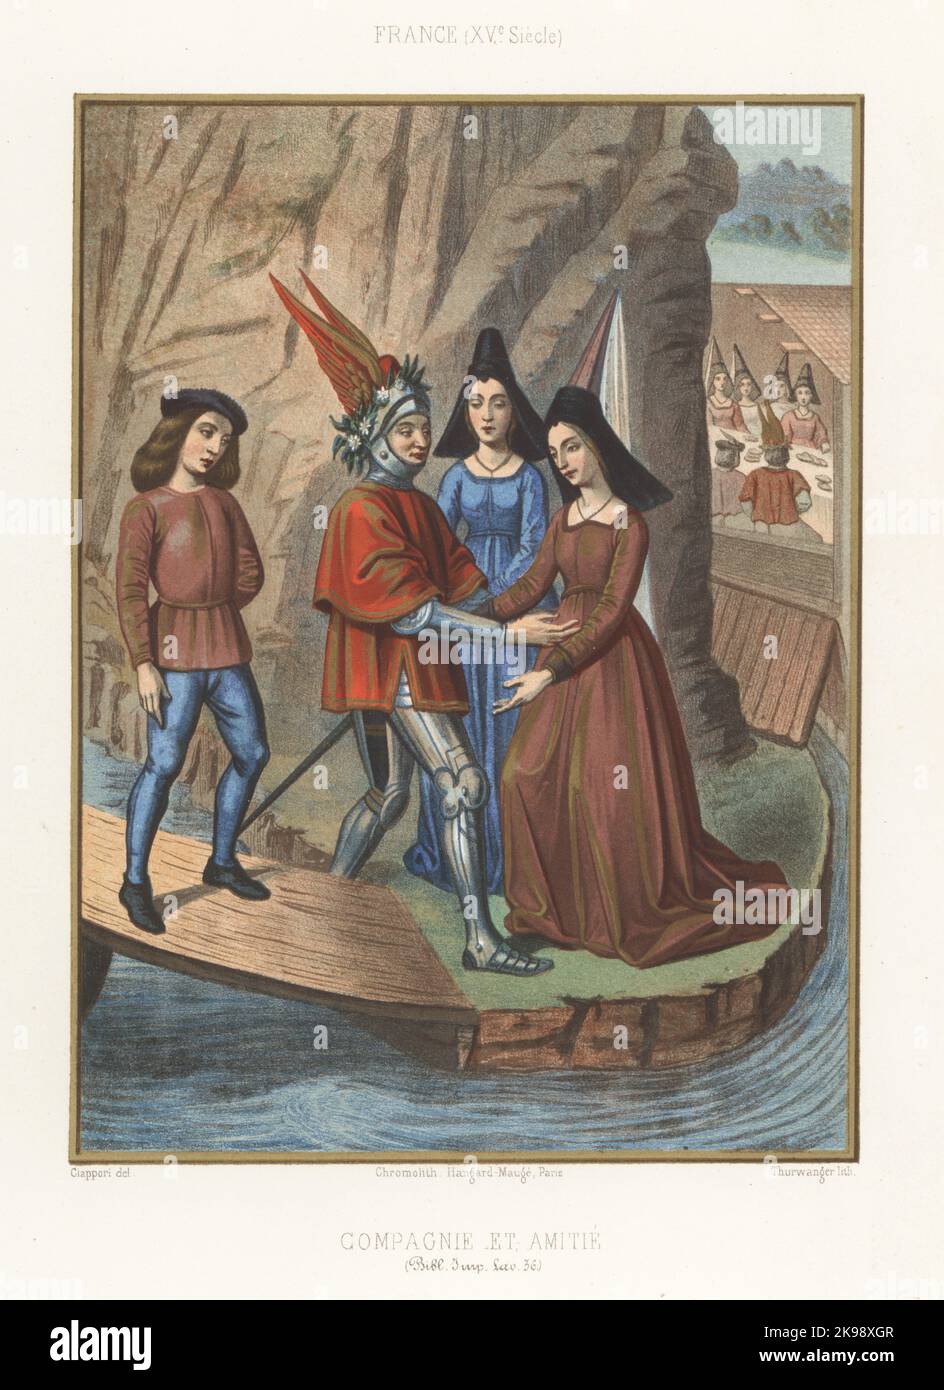 The knight Cuer d'Amour arrives at the land of Compagnie, 15th century. He wears a winged helmet adorned with flowers, red tunic and plate armour. He dines with ferry women in hennin hats. Compagnie et Amitie. France, XVe siecle. From Rene d'Anjou's Roman de tres-douce Mercy au Cuer d'amour epris, 1457, Bibliotheque Imperiale, Fonds de la Valliere MS 36. Chromolithograph by Thurwanger after an illustration by Claudius Joseph Ciappori from Charles Louandre’s Les Arts Somptuaires, The Sumptuary Arts, Hangard-Mauge, Paris, 1858. Stock Photo